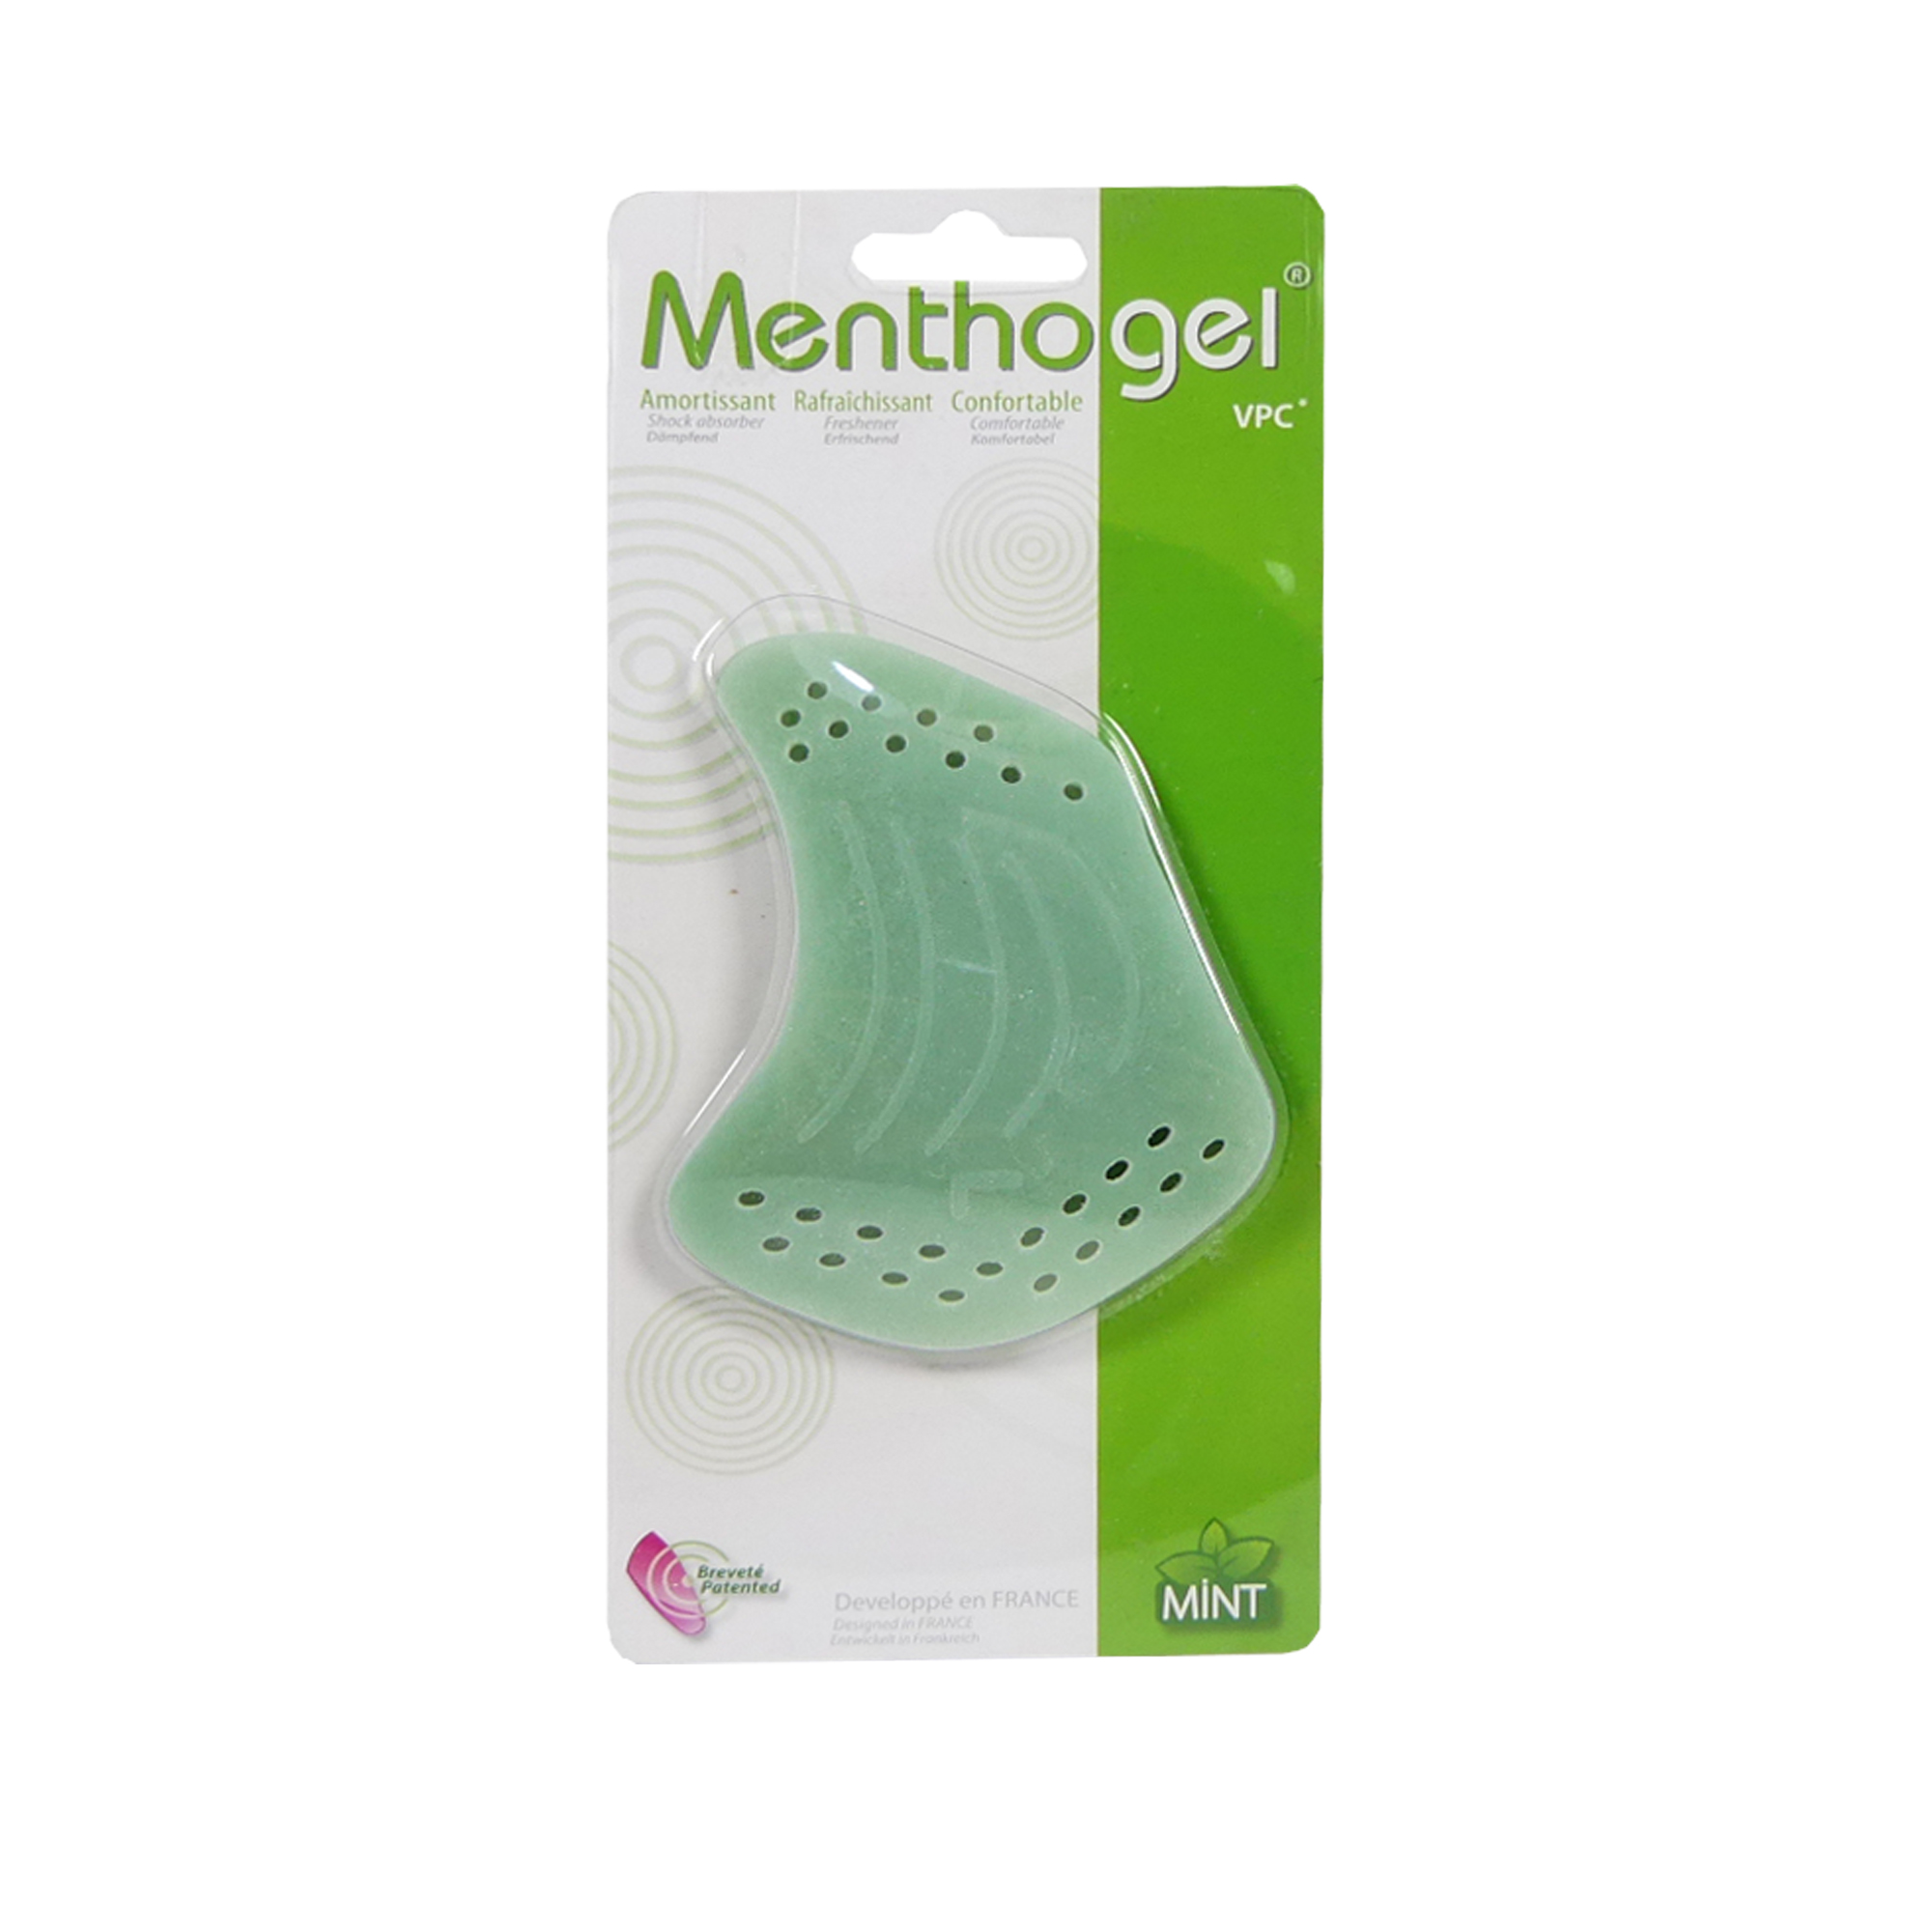 Wellys 2 Pieces Midfoot Cushion "Menthogel"